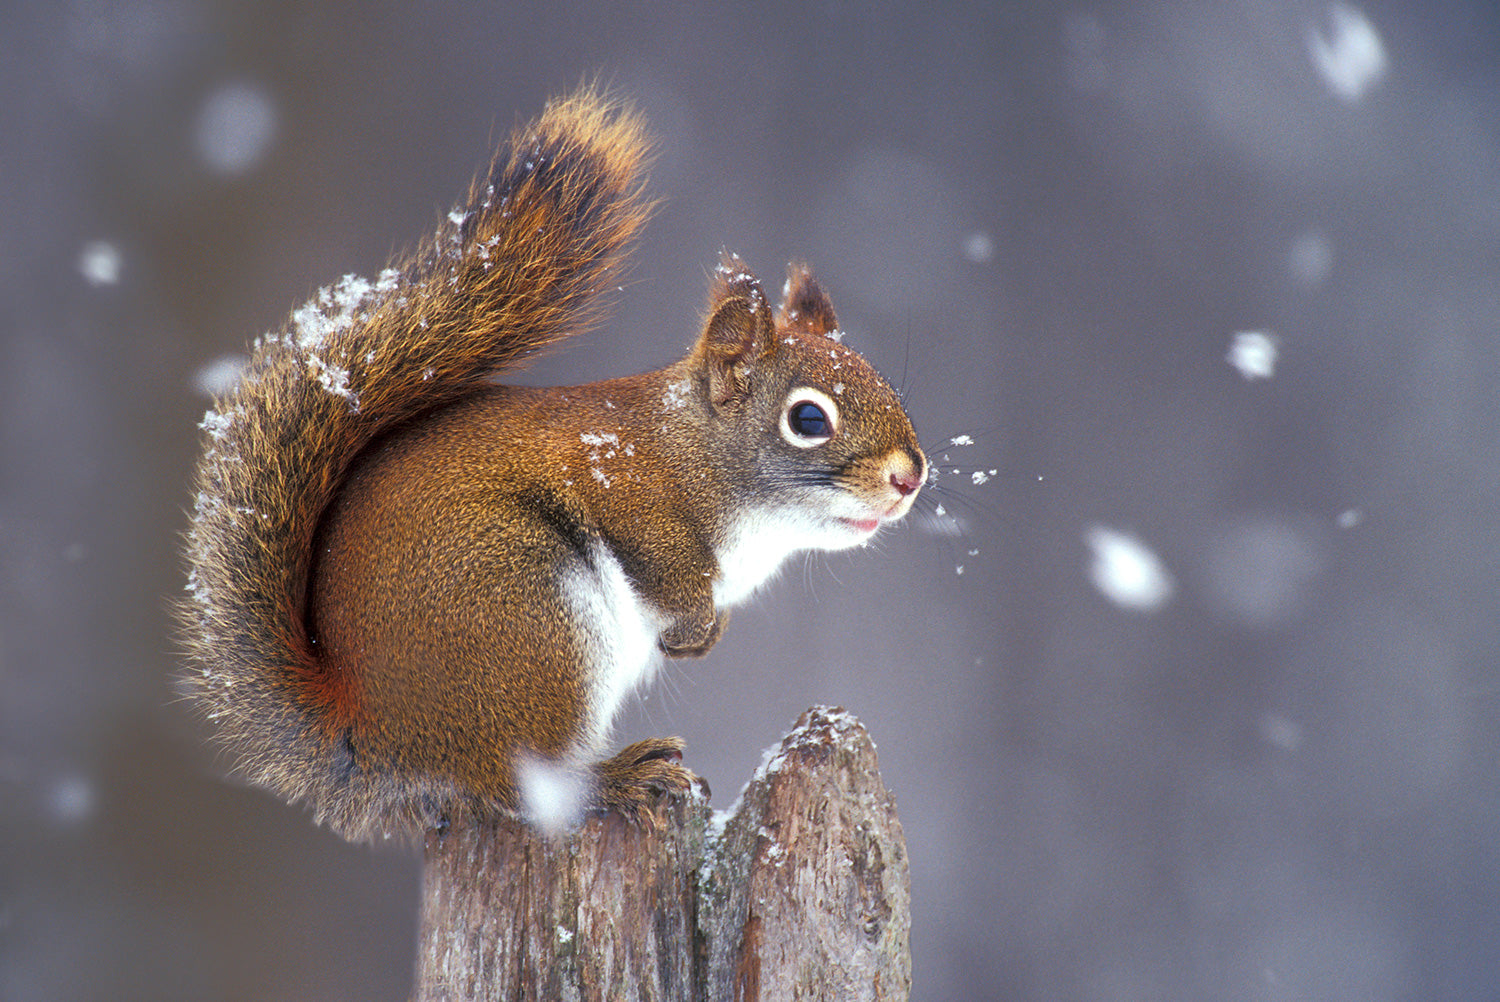 A red squirrel sitting on a branch in the middle of a snowfall. End of image description.